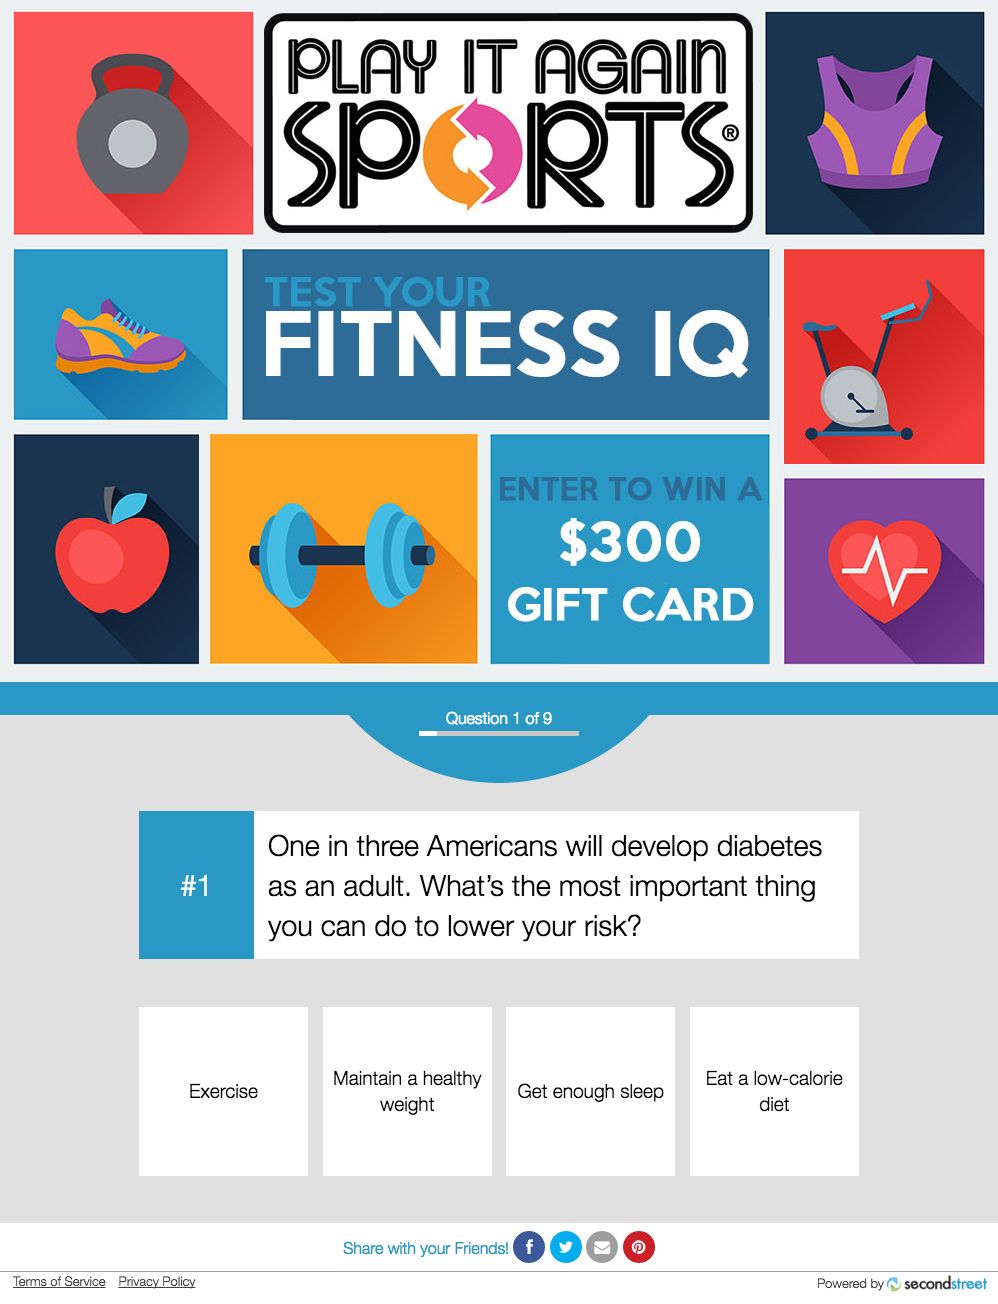 Fitness Quiz Sponsored by Sporting Goods Store